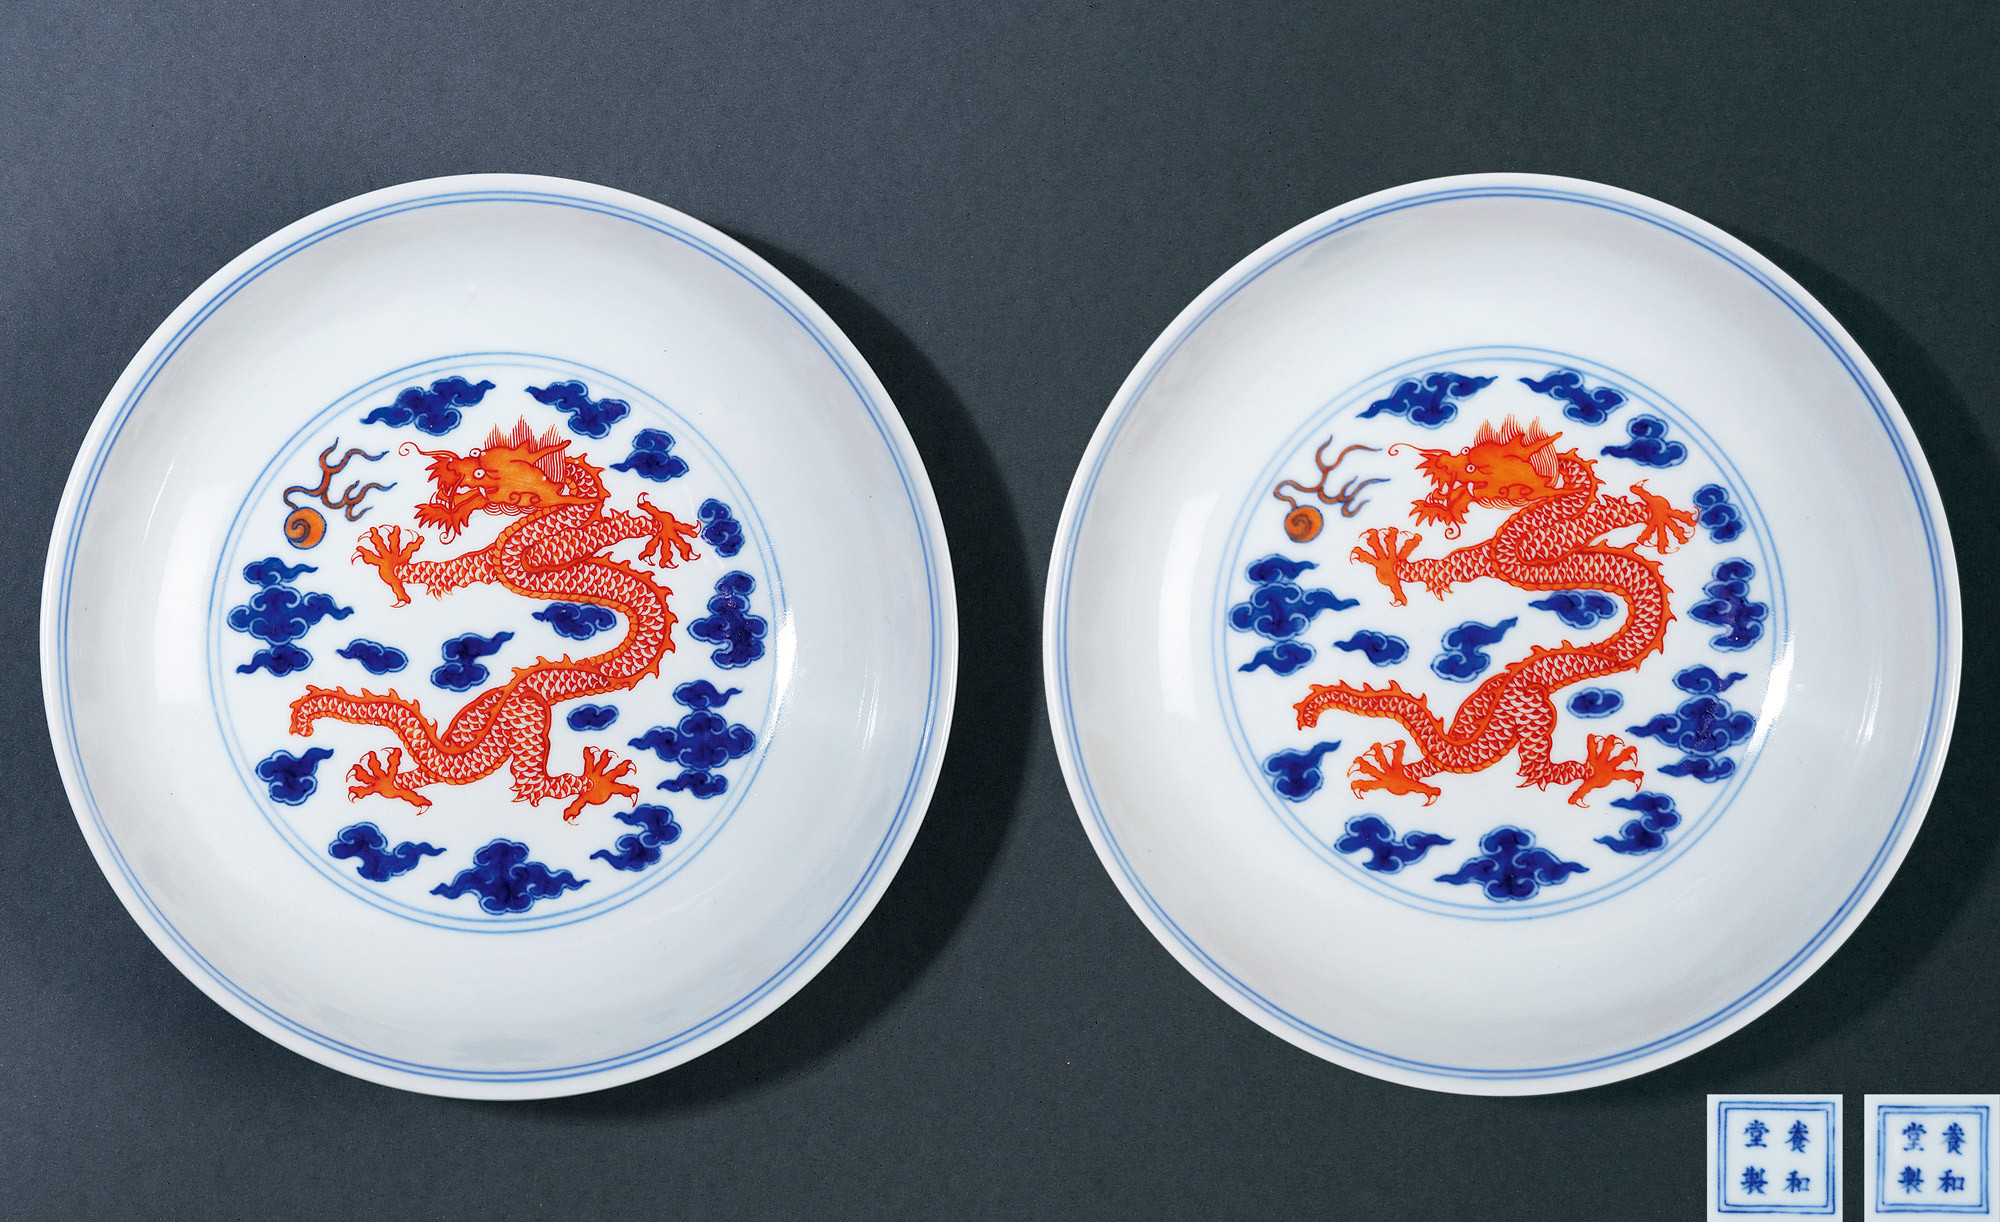 A PAIR OF BLUE AND WHITE AND IRON-RED PLATE WITH DRAGON AMONG CLOUDS DESIGN